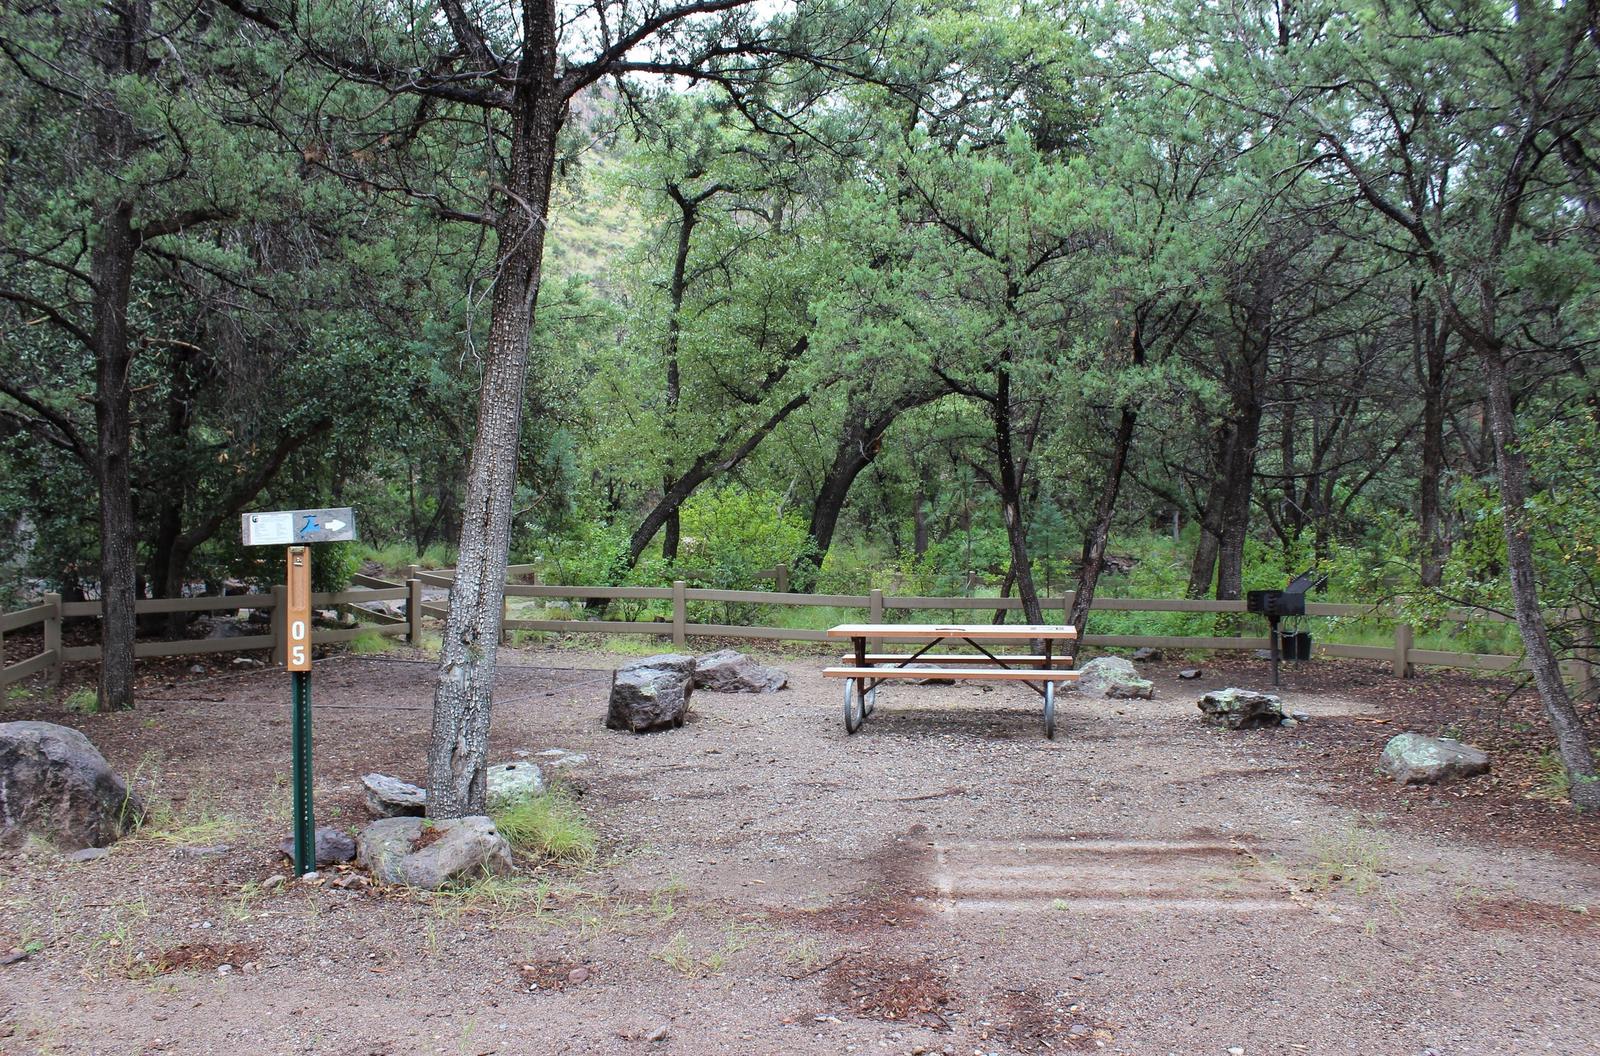 Campsite #5 is located on the inside of the loop.Campsite #5